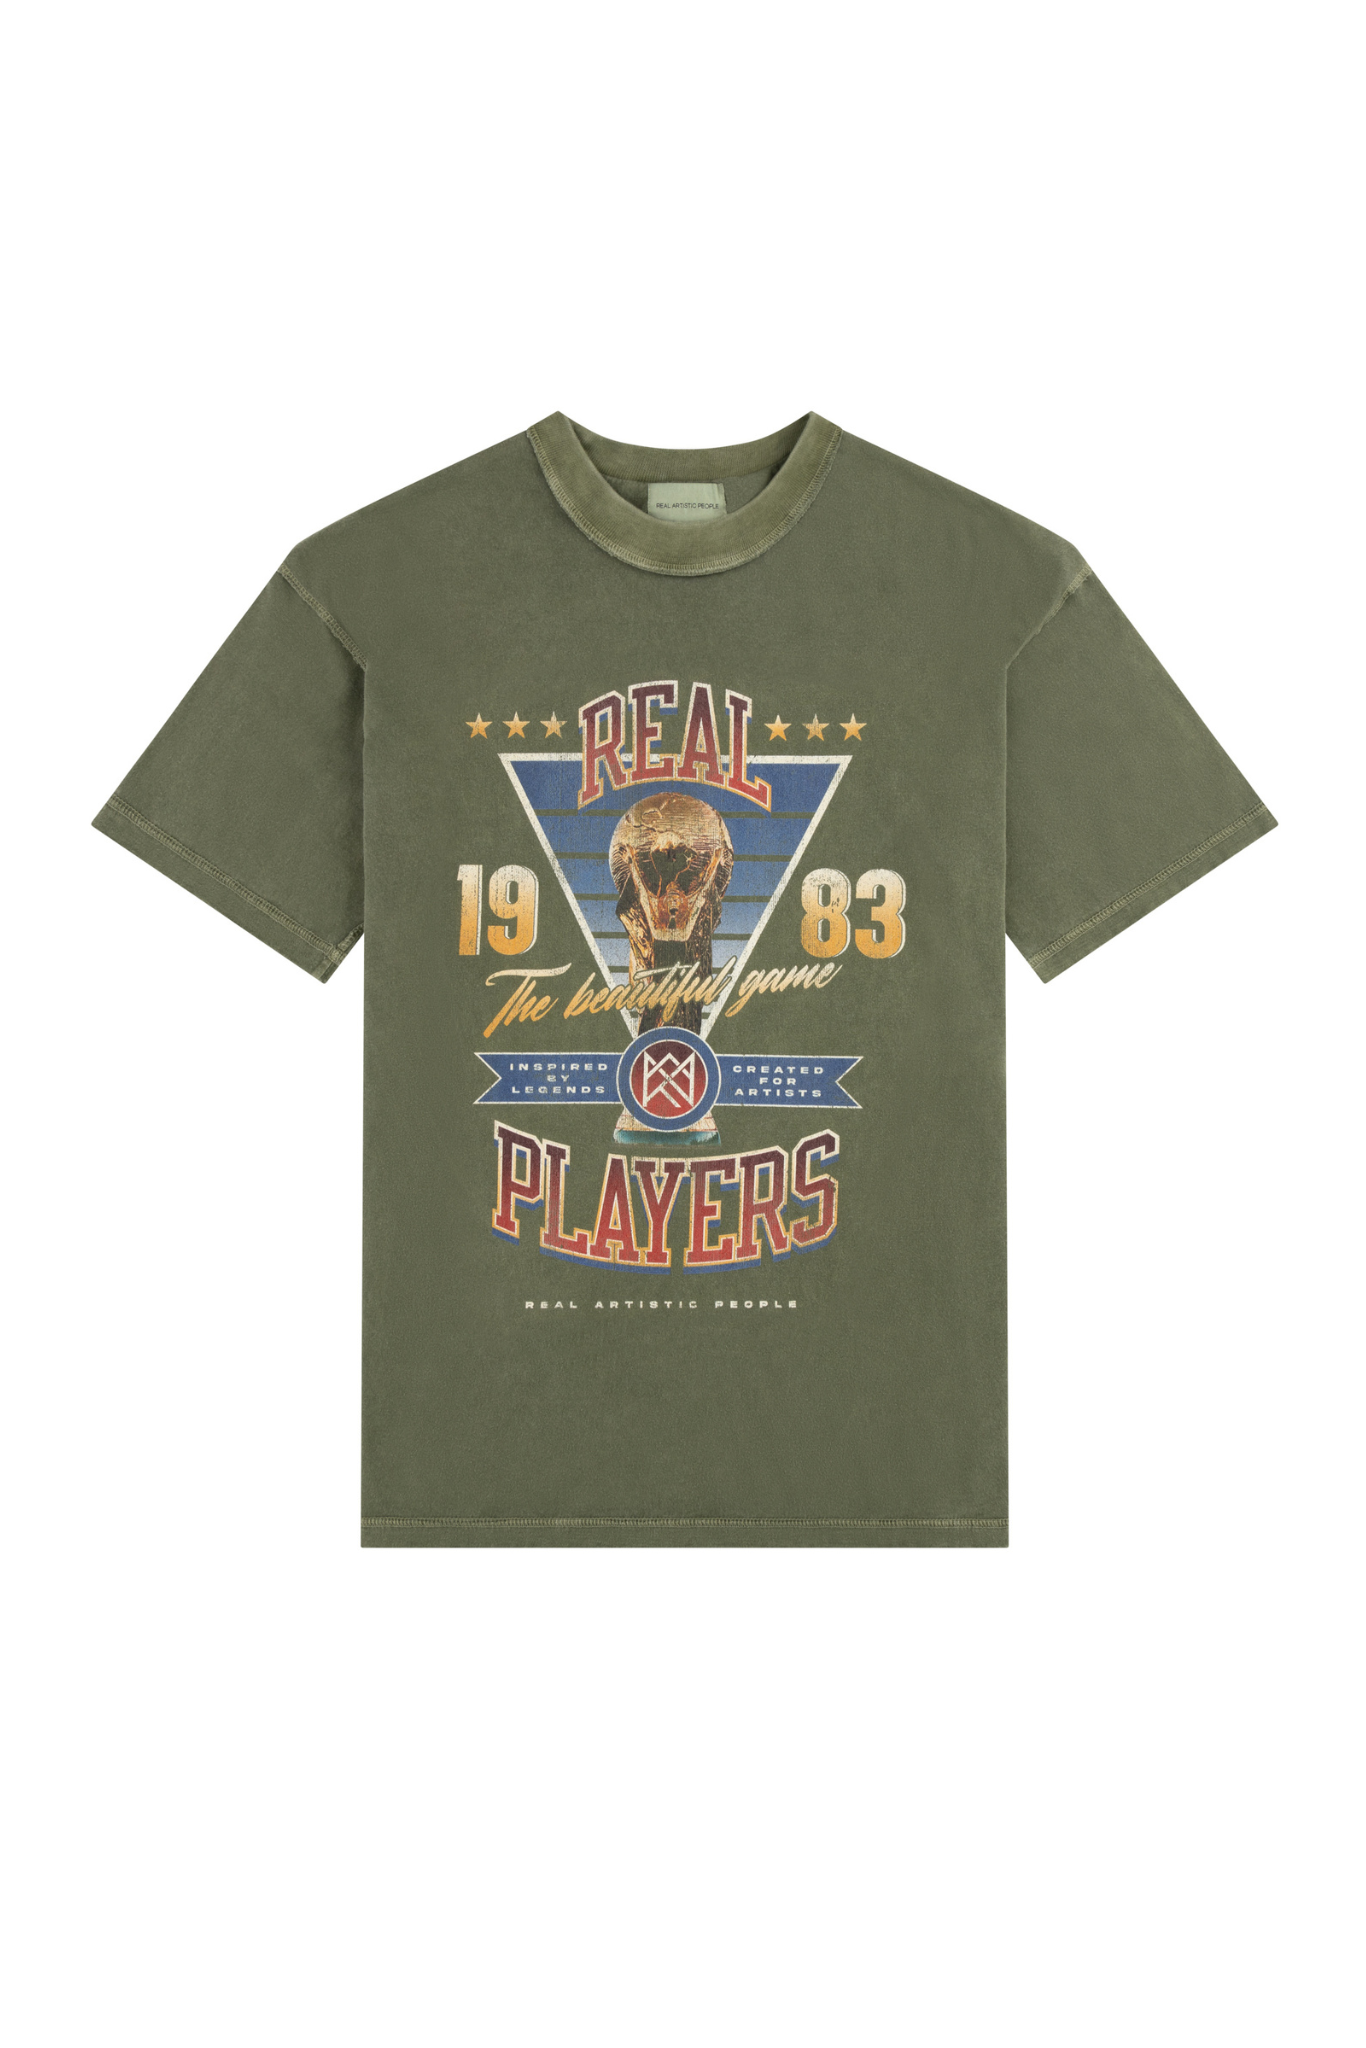 Real Players Graphic Tee - Real Artistic People